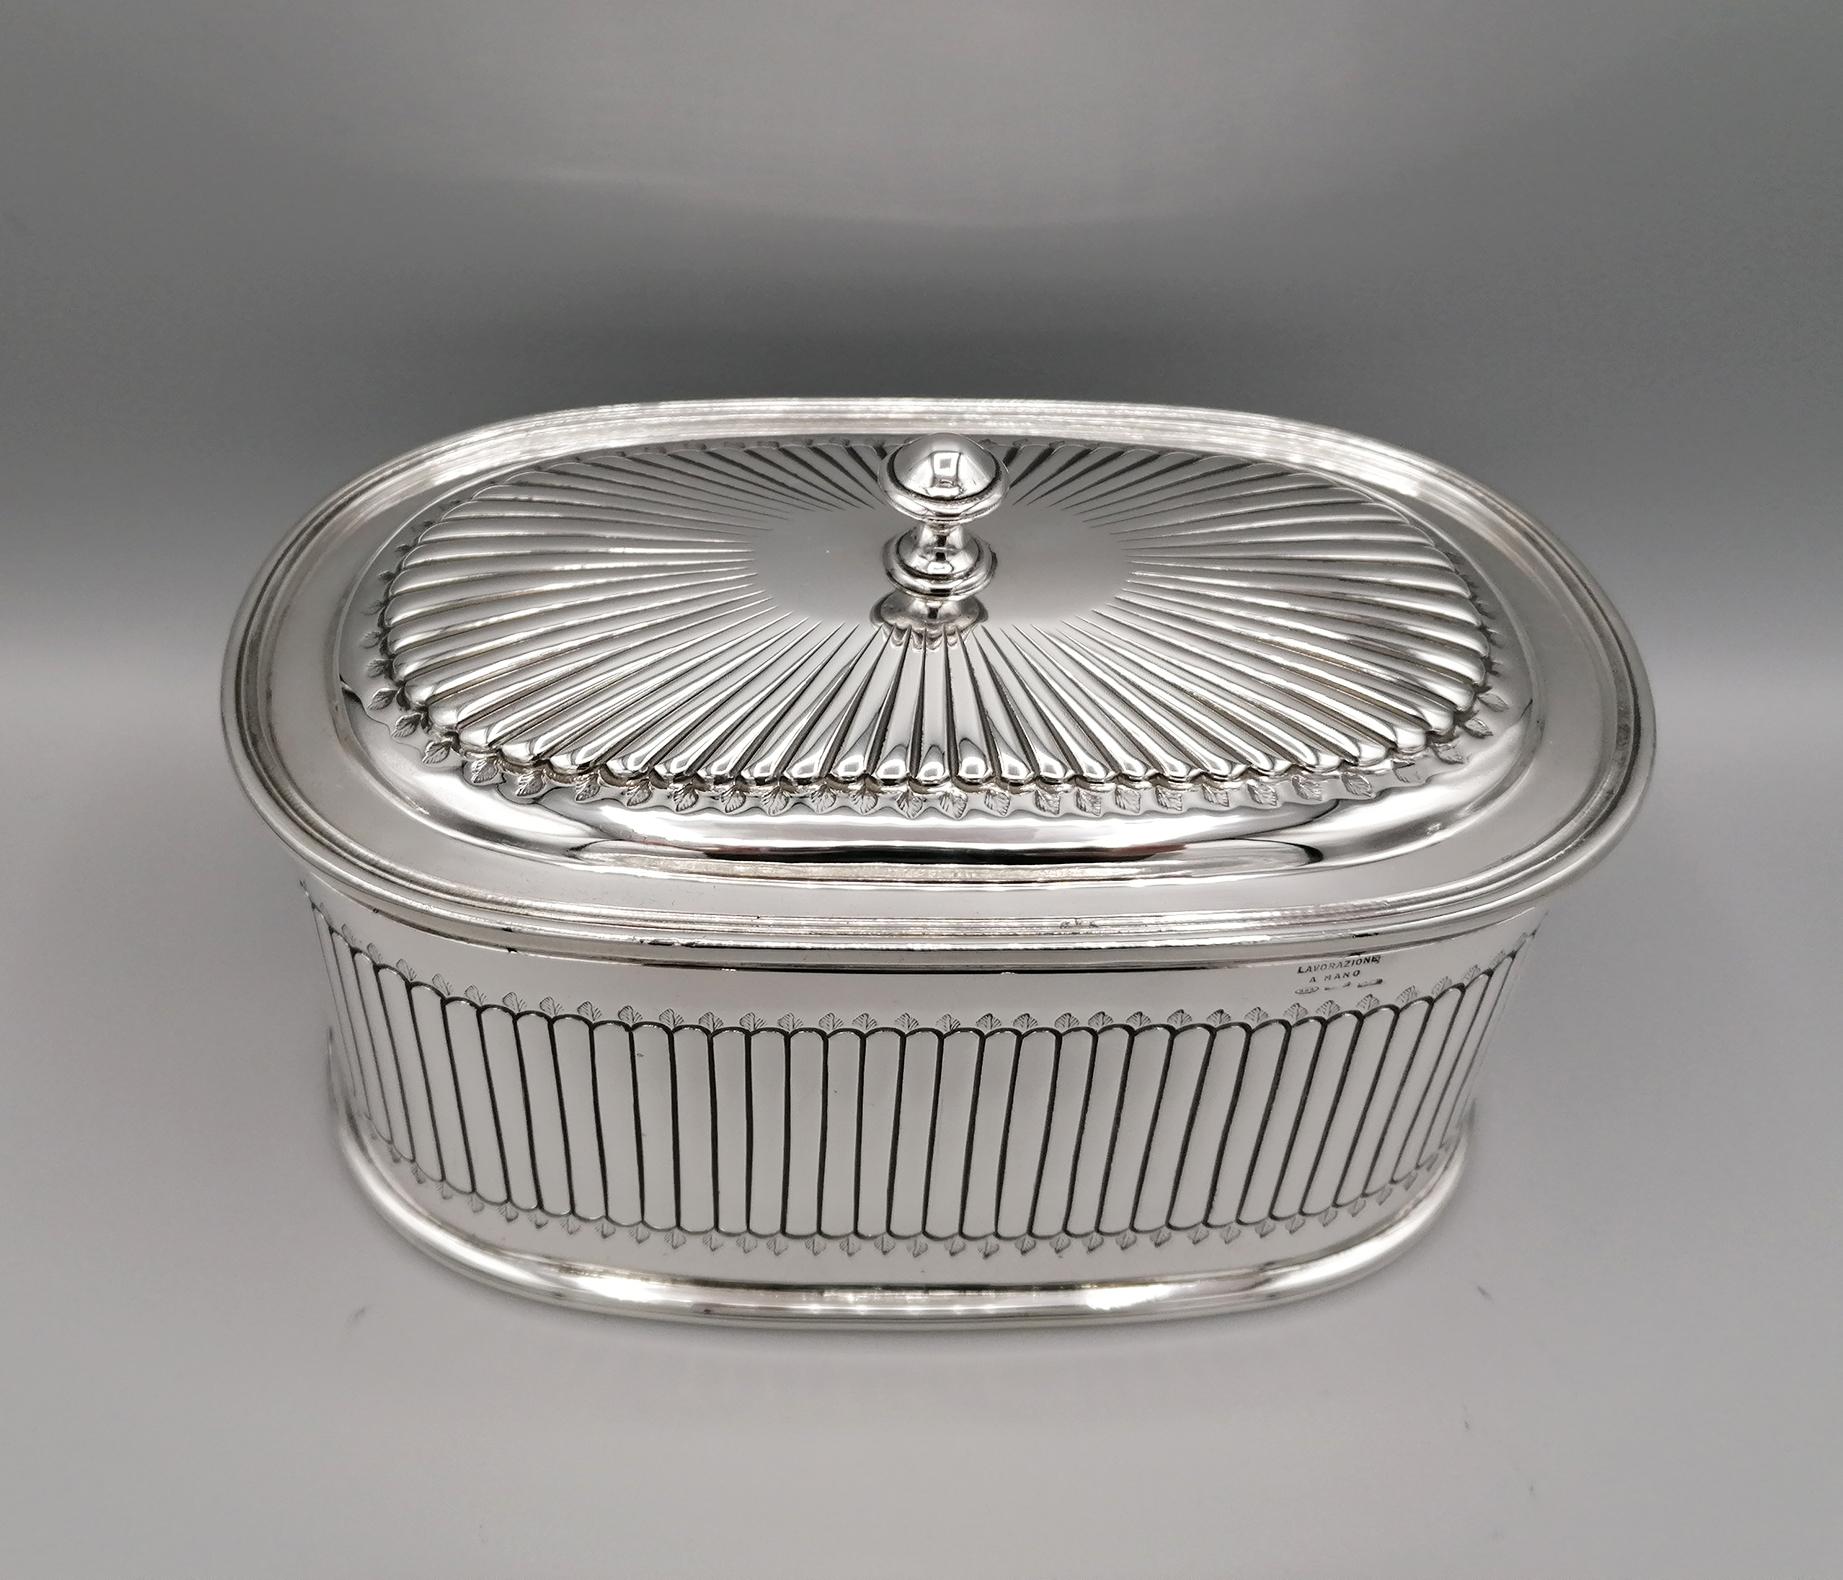 Handmade George III style oblong box in sterling silver.
On the body of the box typical lines with fluted. The lid has the same design but embossed. The handle has a simple cast knob. The inside of the box has been embellished with a 24-karat gold